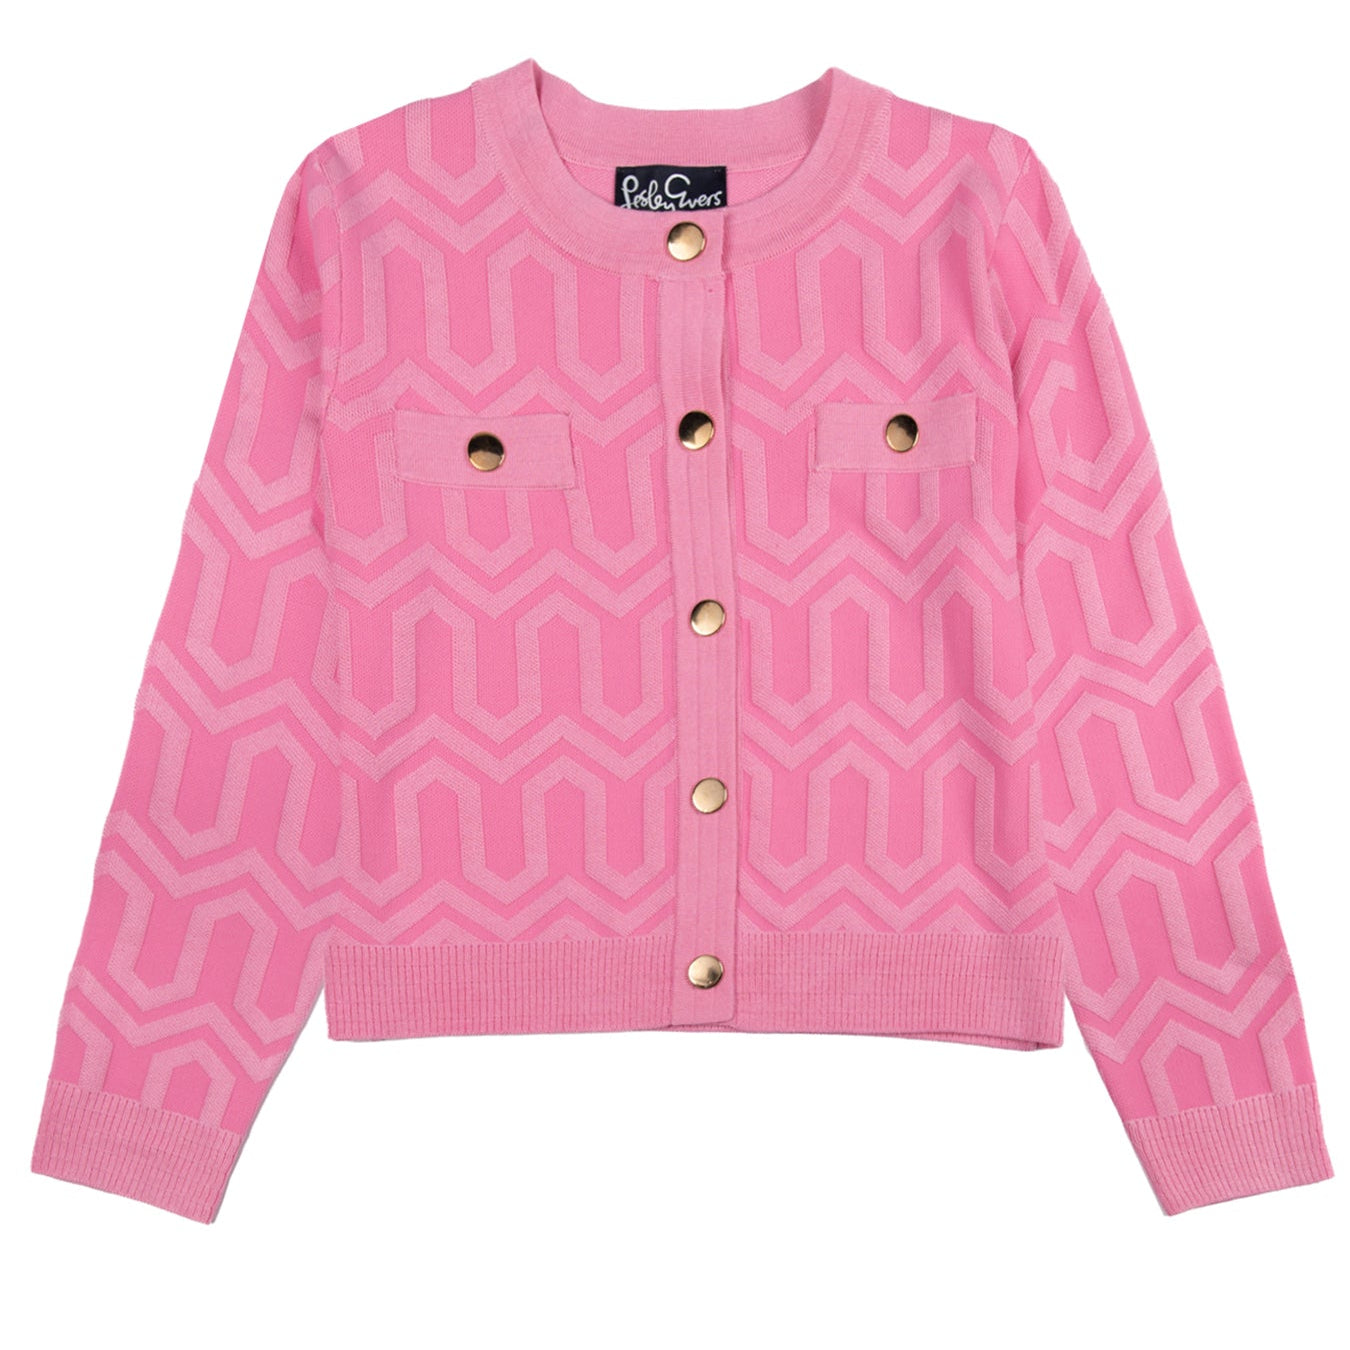 LEA cardigan Pink - Lesley Evers-cardigan-Shop-Shop/All Products